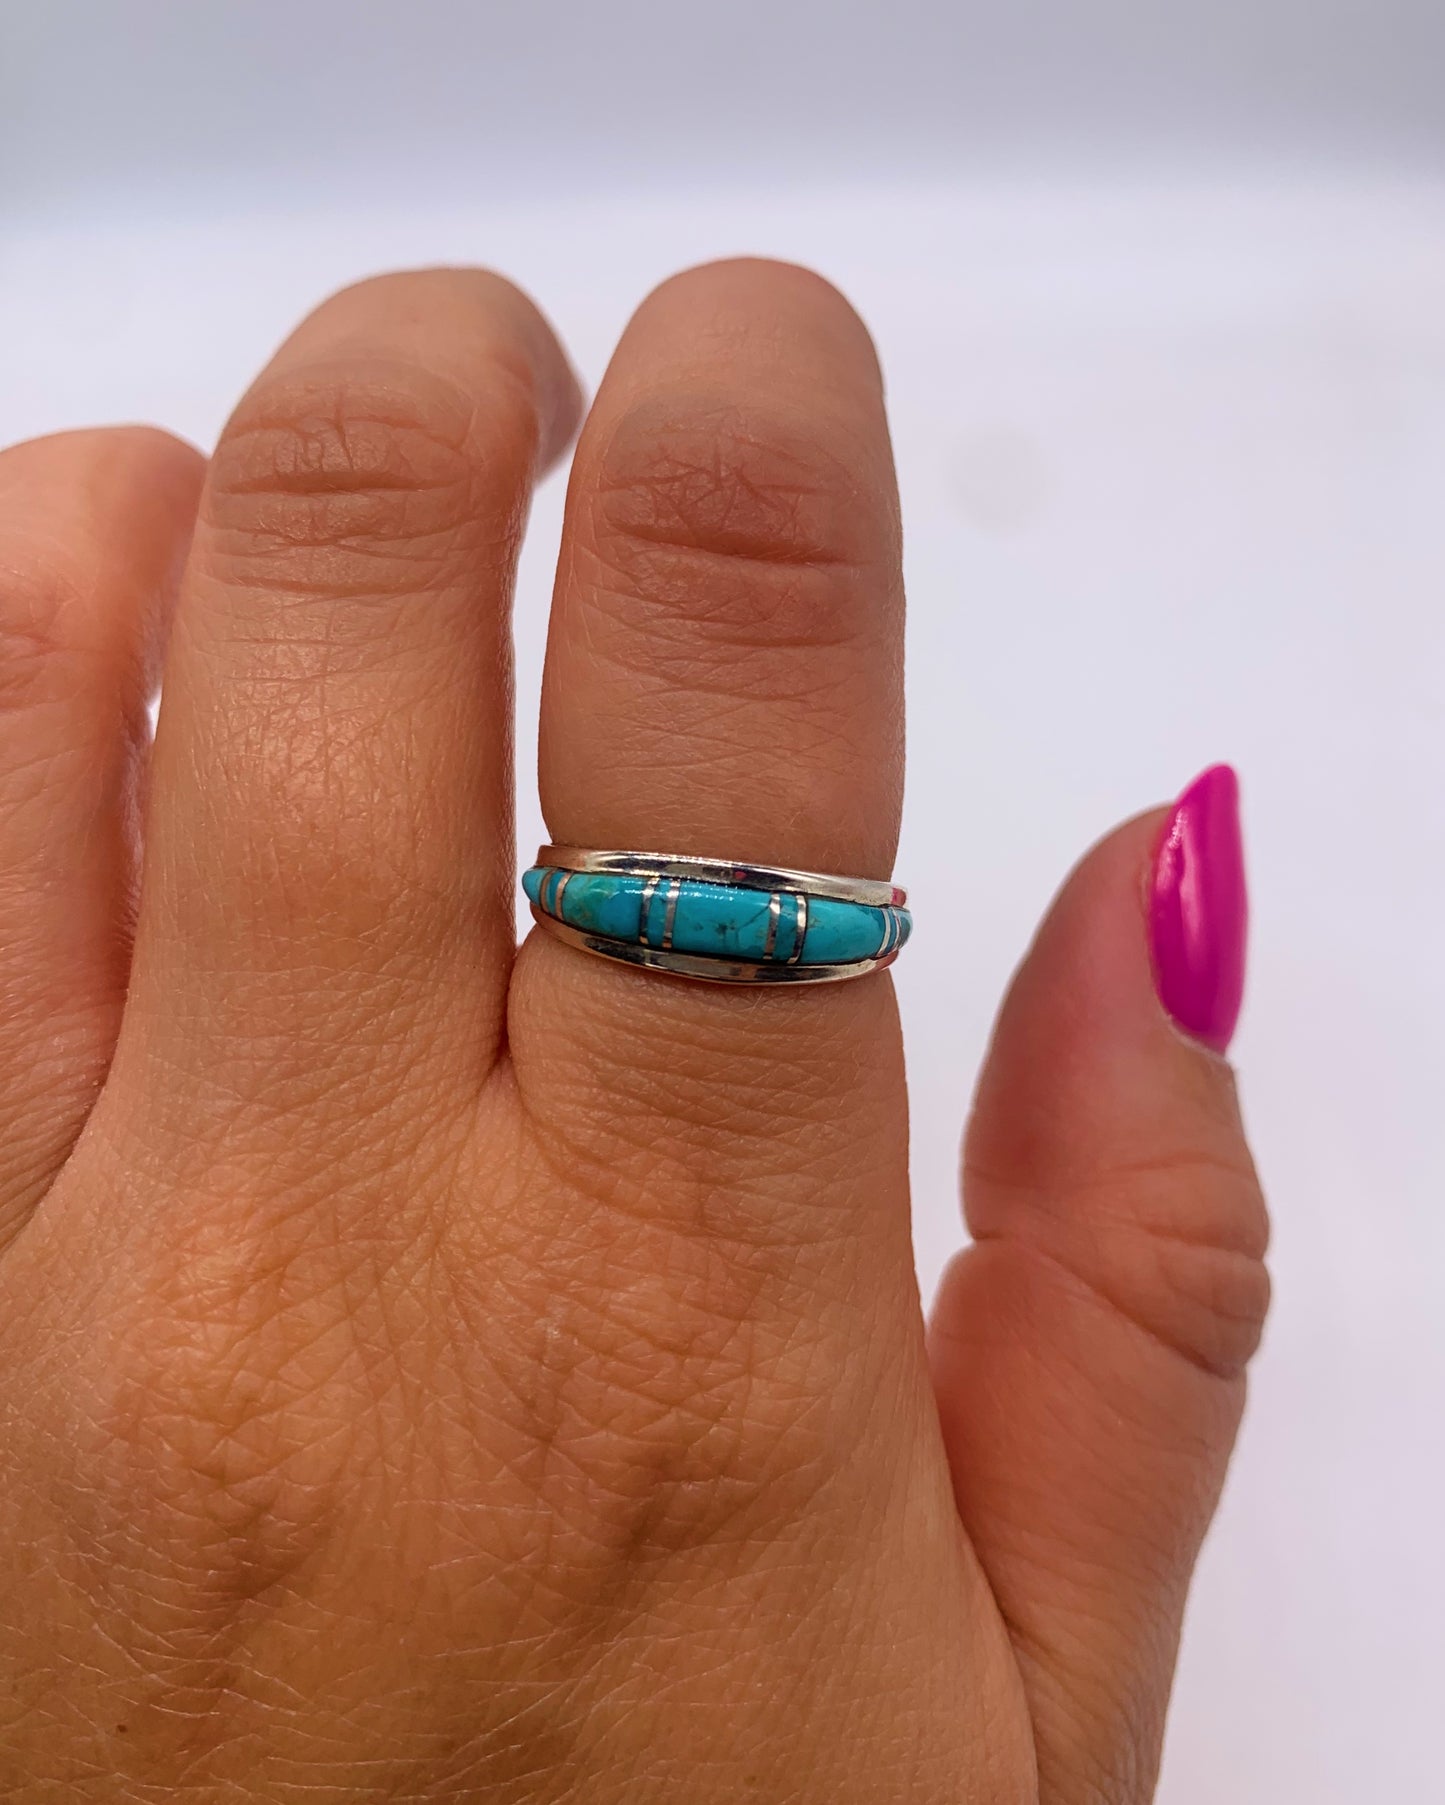 TURQUOISE TAPERED INLAY BAND